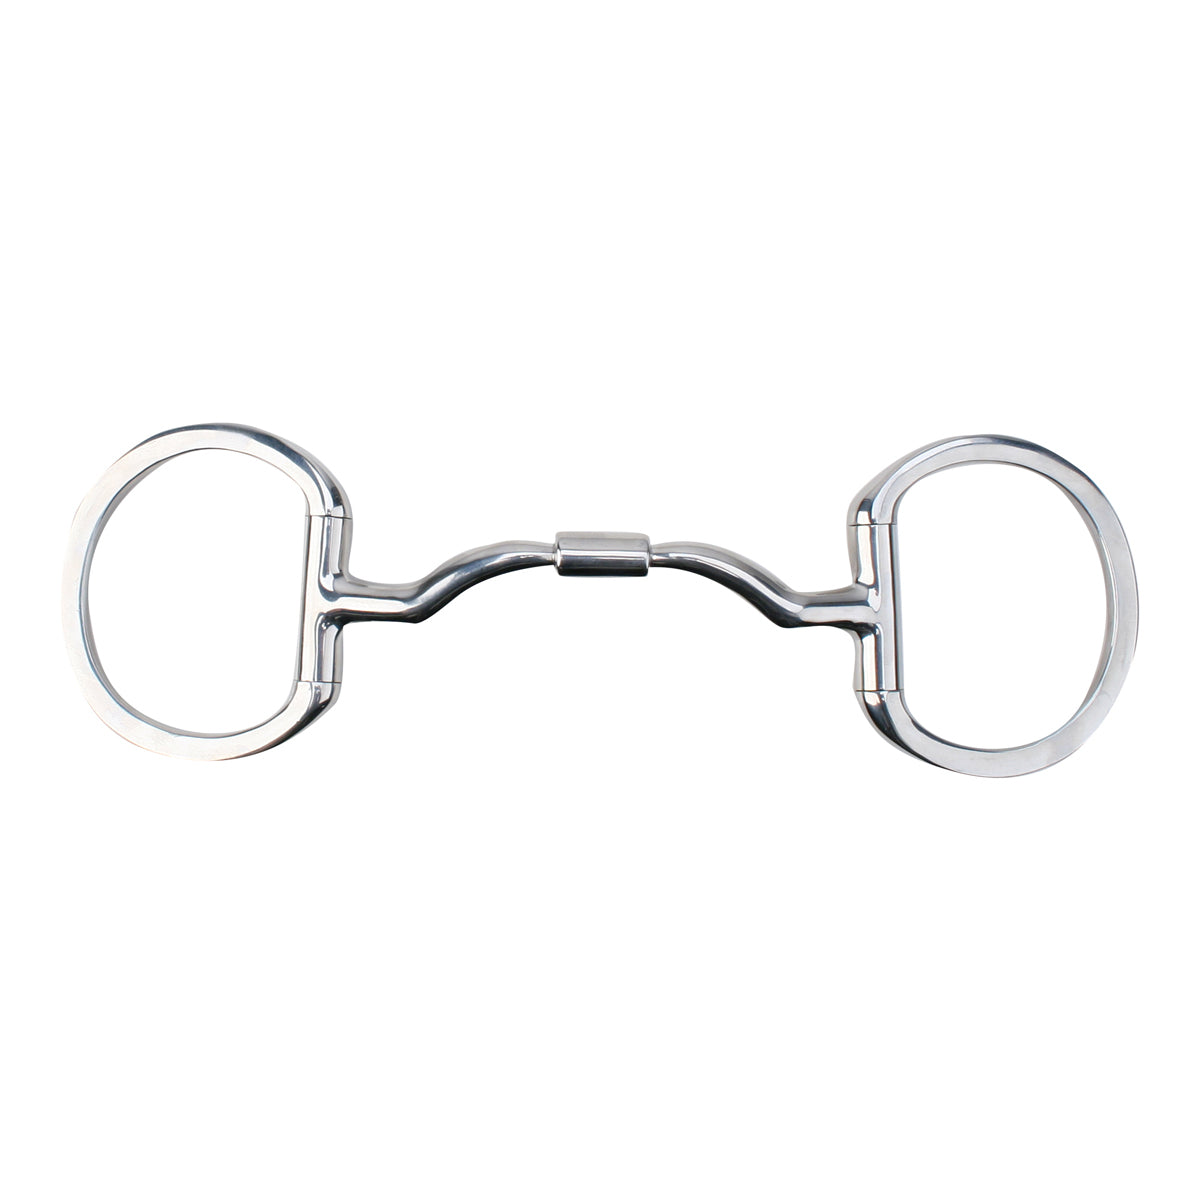 Toklat Myler Eggbutt without Hooks with Wide Ported Barrel Snaffle MB 33WL